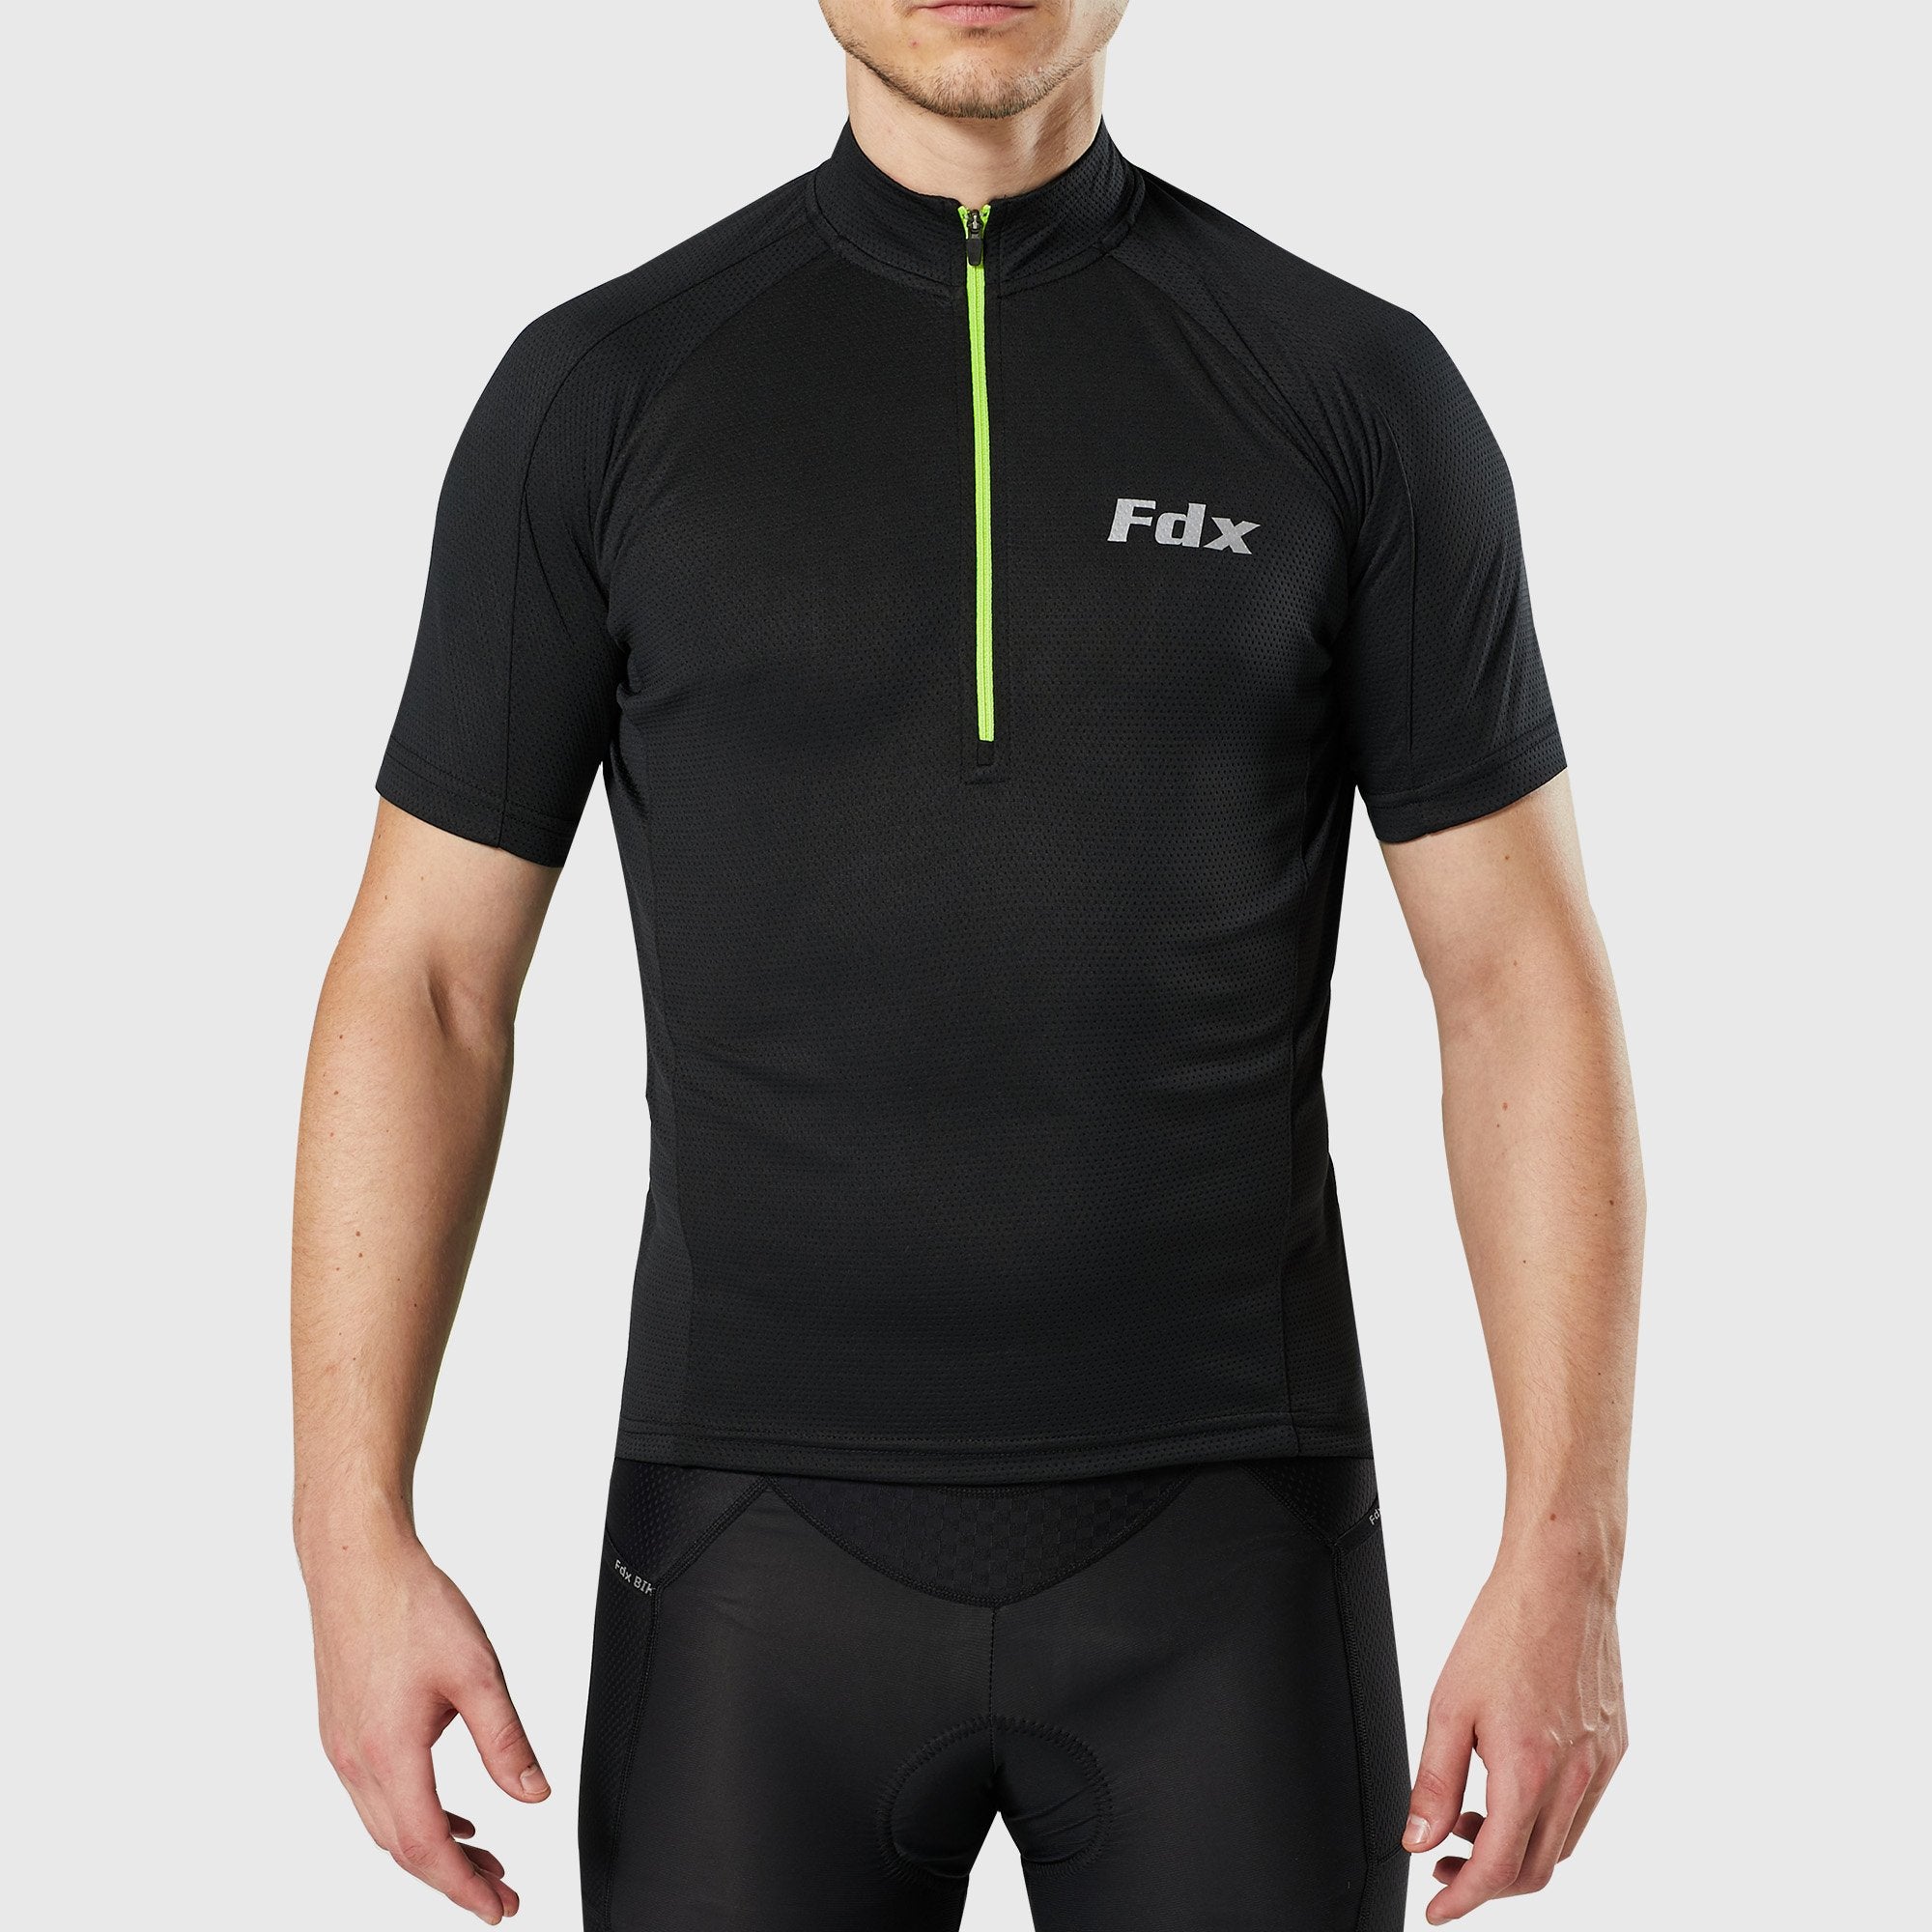  Fdx black best short sleeves men’s cycling jersey breathable lightweight hi-viz Reflective details summer biking top, full zip skin friendly half sleeves mesh cycling shirt for indoor & outdoor riding with two back & 1 zip pockets